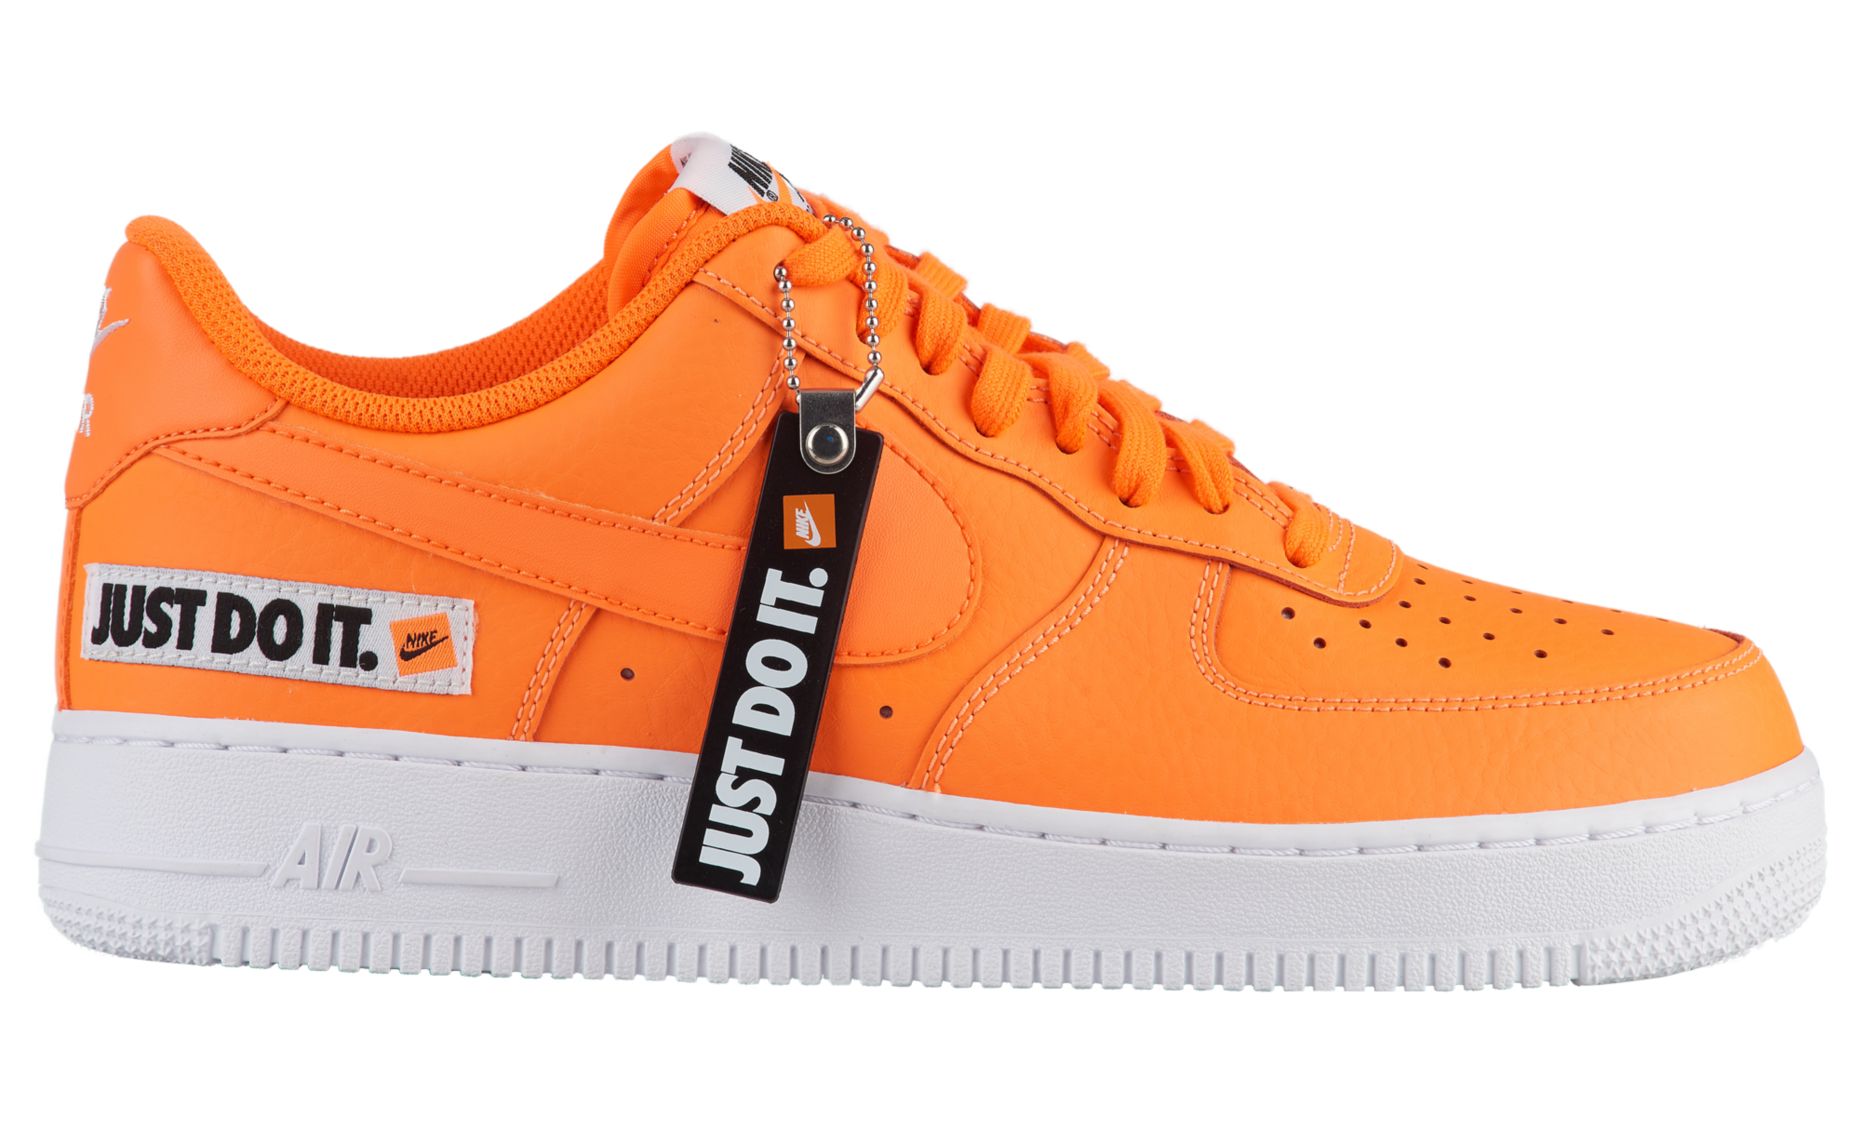 The Nike Air Force 1 Low 'Just Do It' Has a Release Date - WearTesters غداء لذيذ